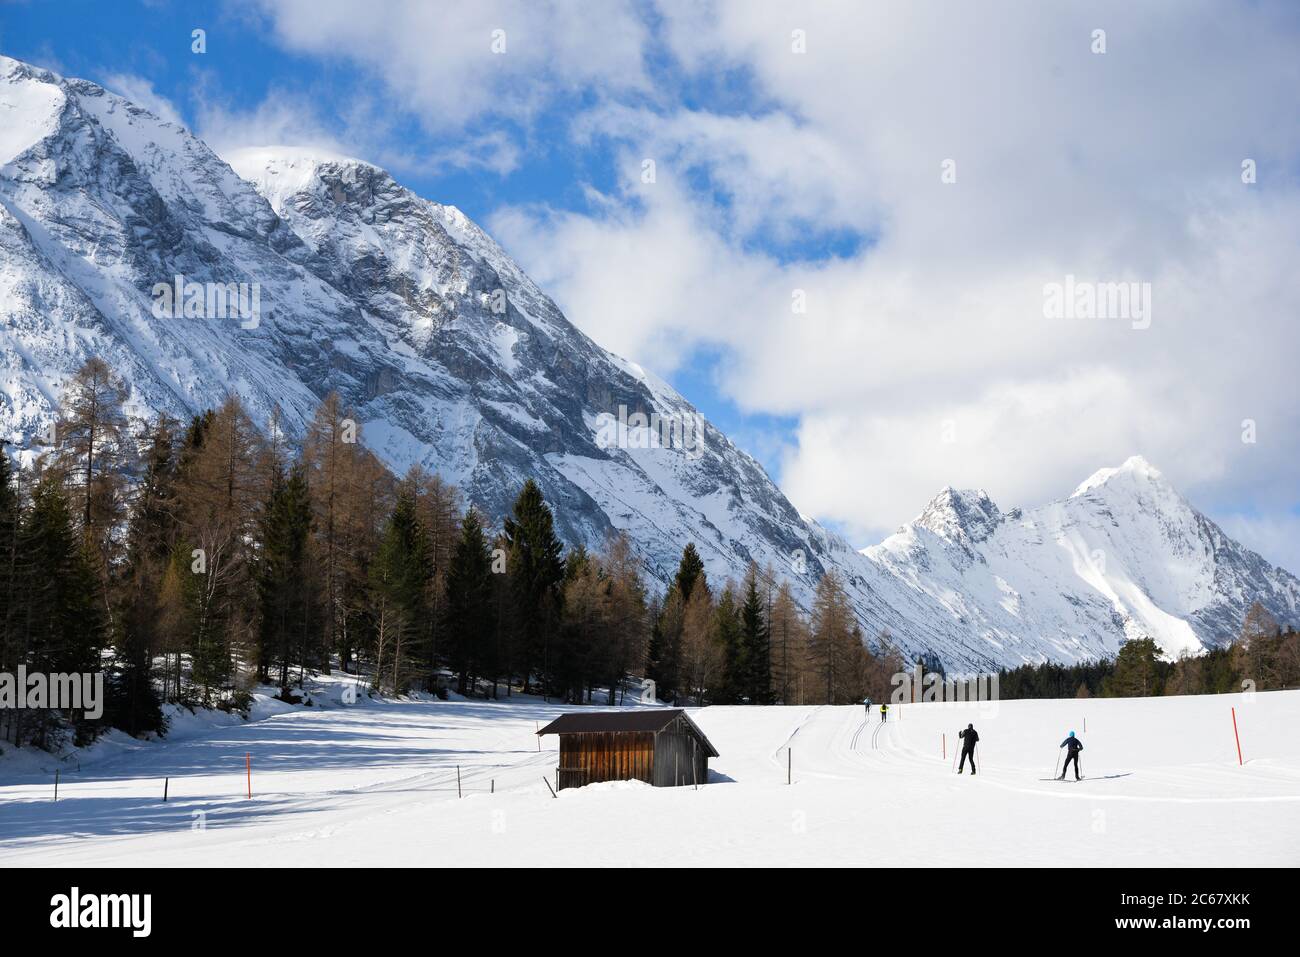 Cross-country skiing on the large network of trails near Leutasch, Austria, in the Seefeld region. Stock Photo